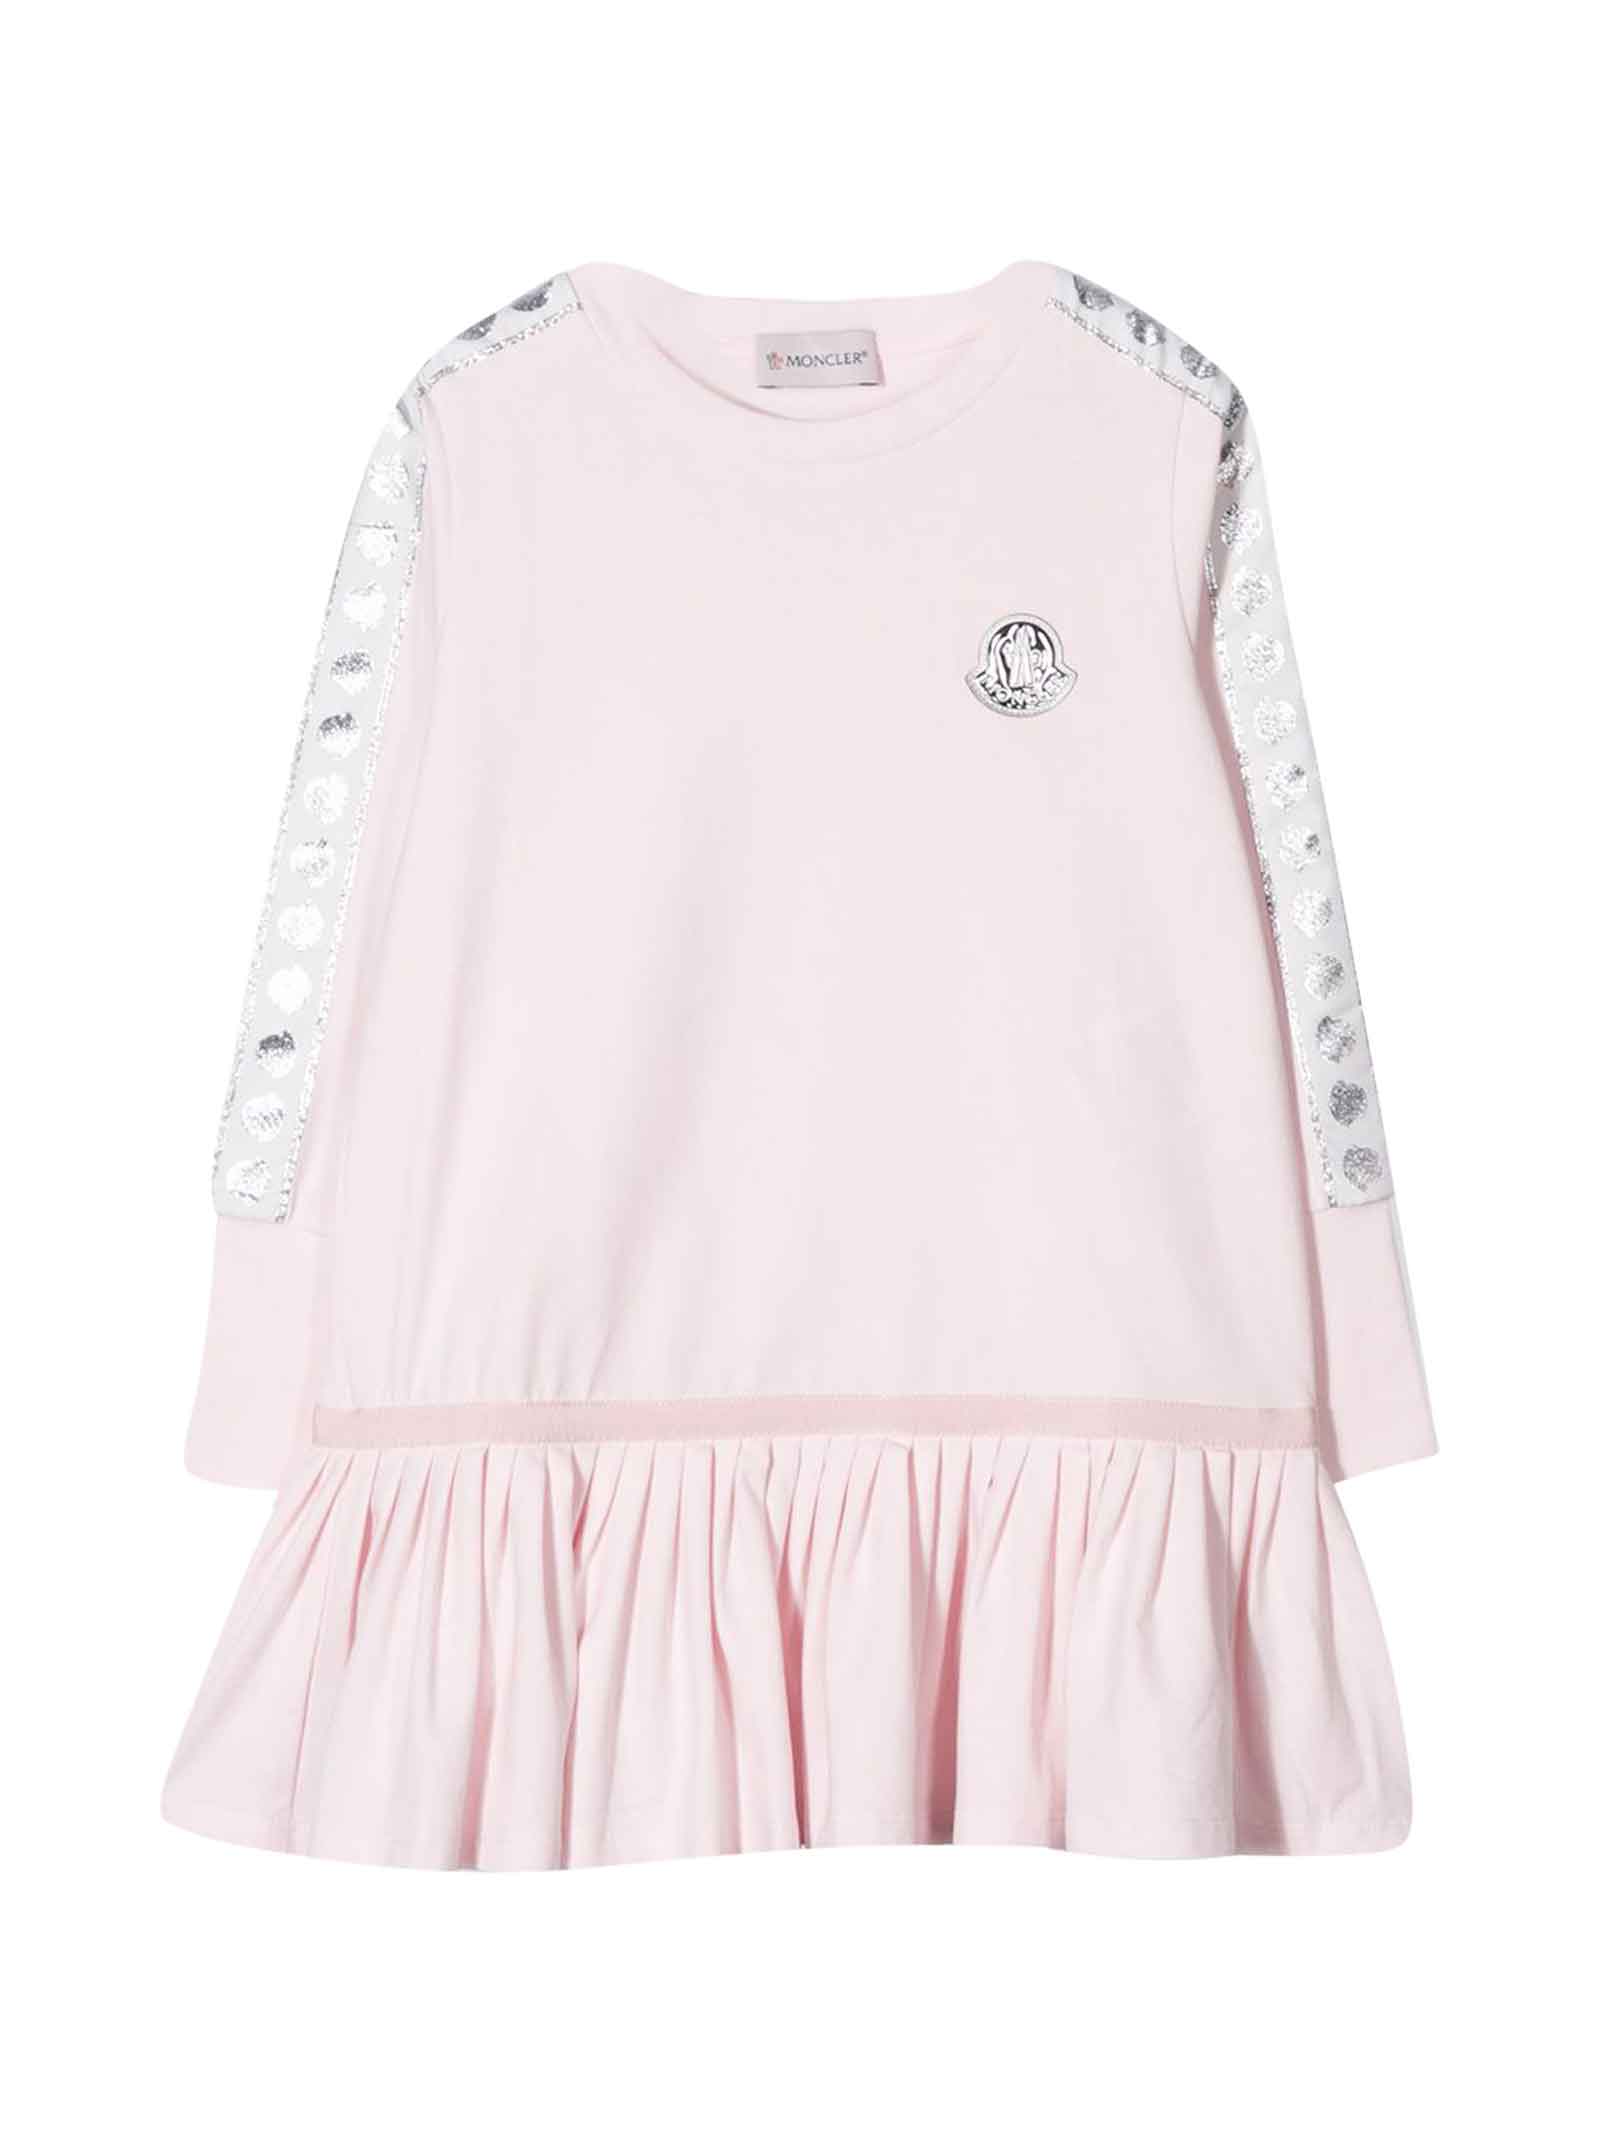 MONCLER PINK DRESS WITH LOGO APPLICATION,11261940